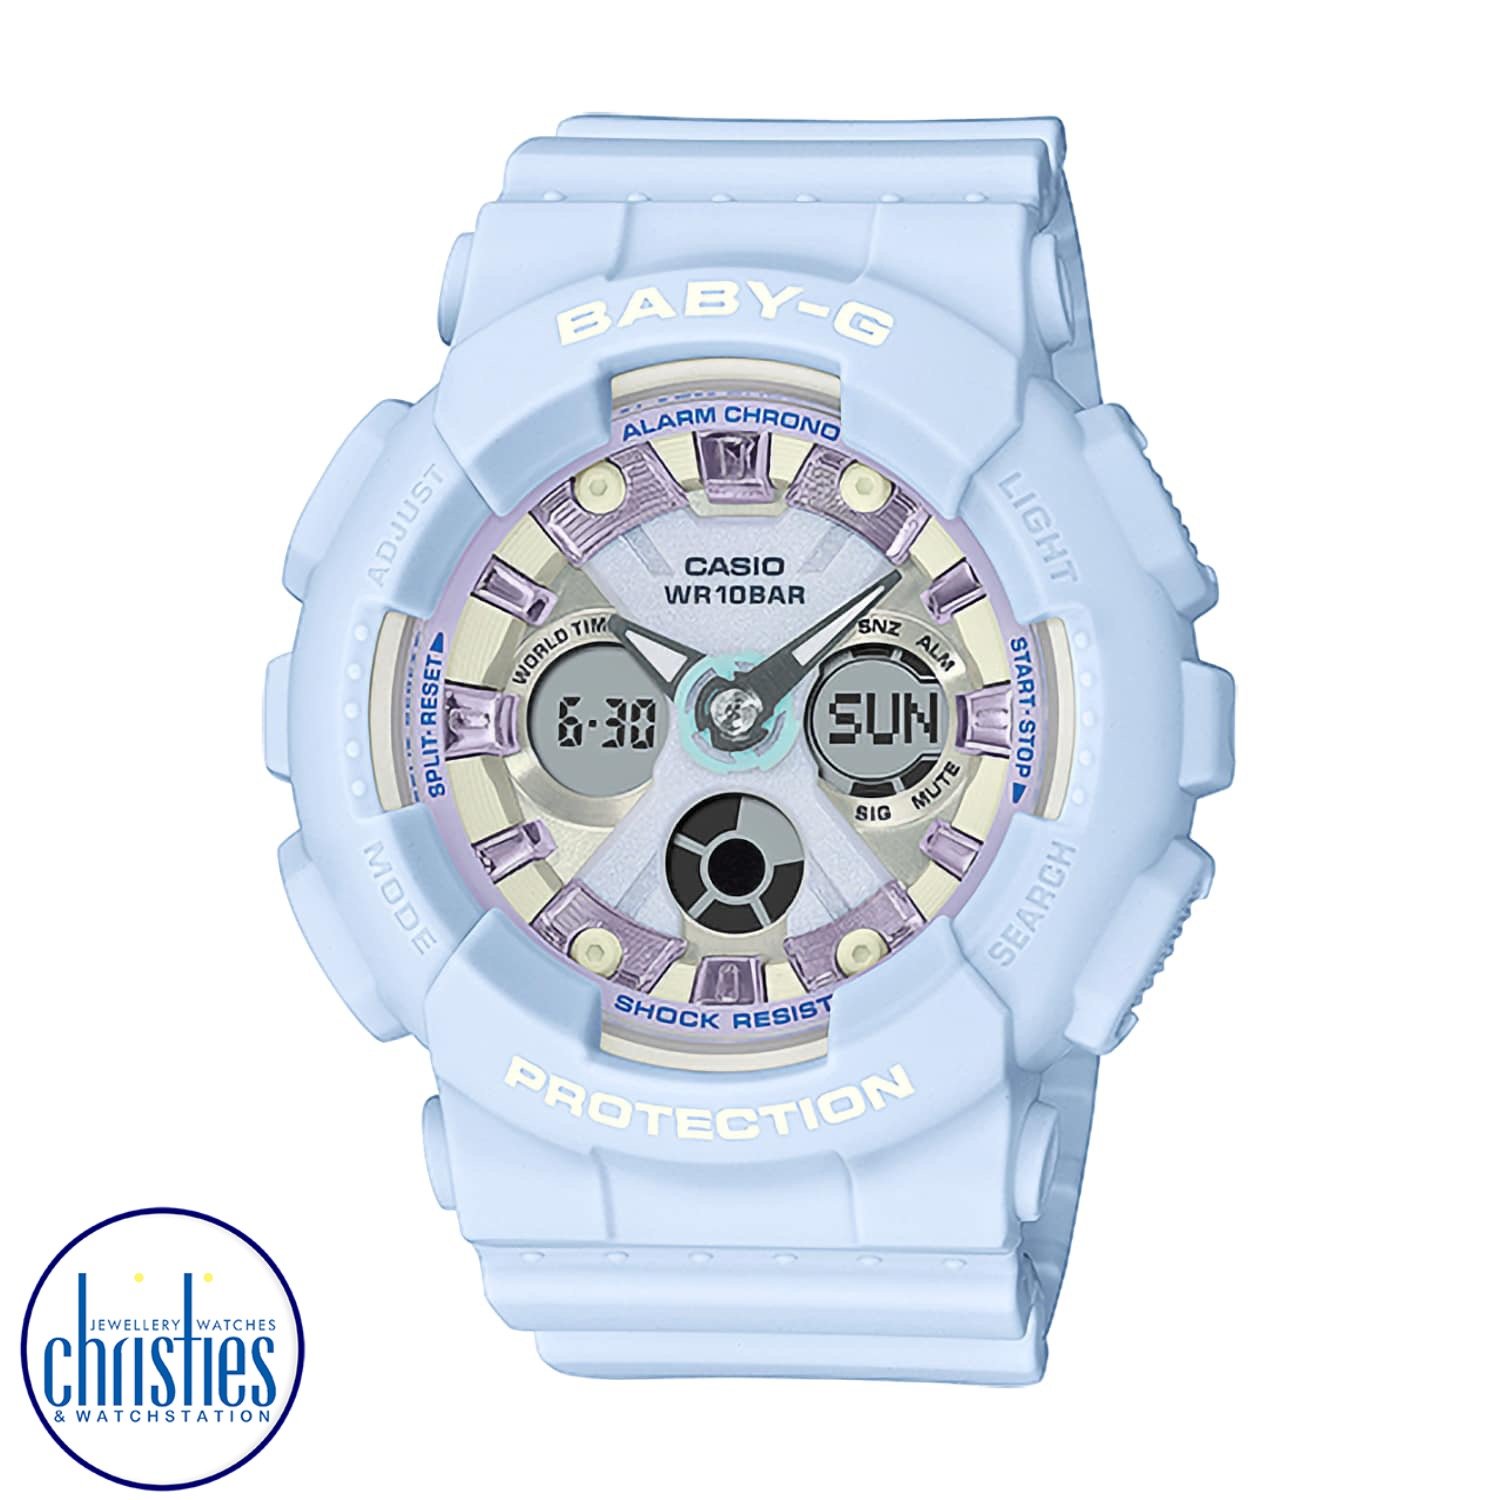 BA130WP-2A Casio BabY-G Watch Icy Pastel Series. Keep your cool with an icy pastel take on the ever-popular mannish BA-130 design with oversized case. Shock-resistant construction and water resistance up to 100 meters deliver the durable practicality you 